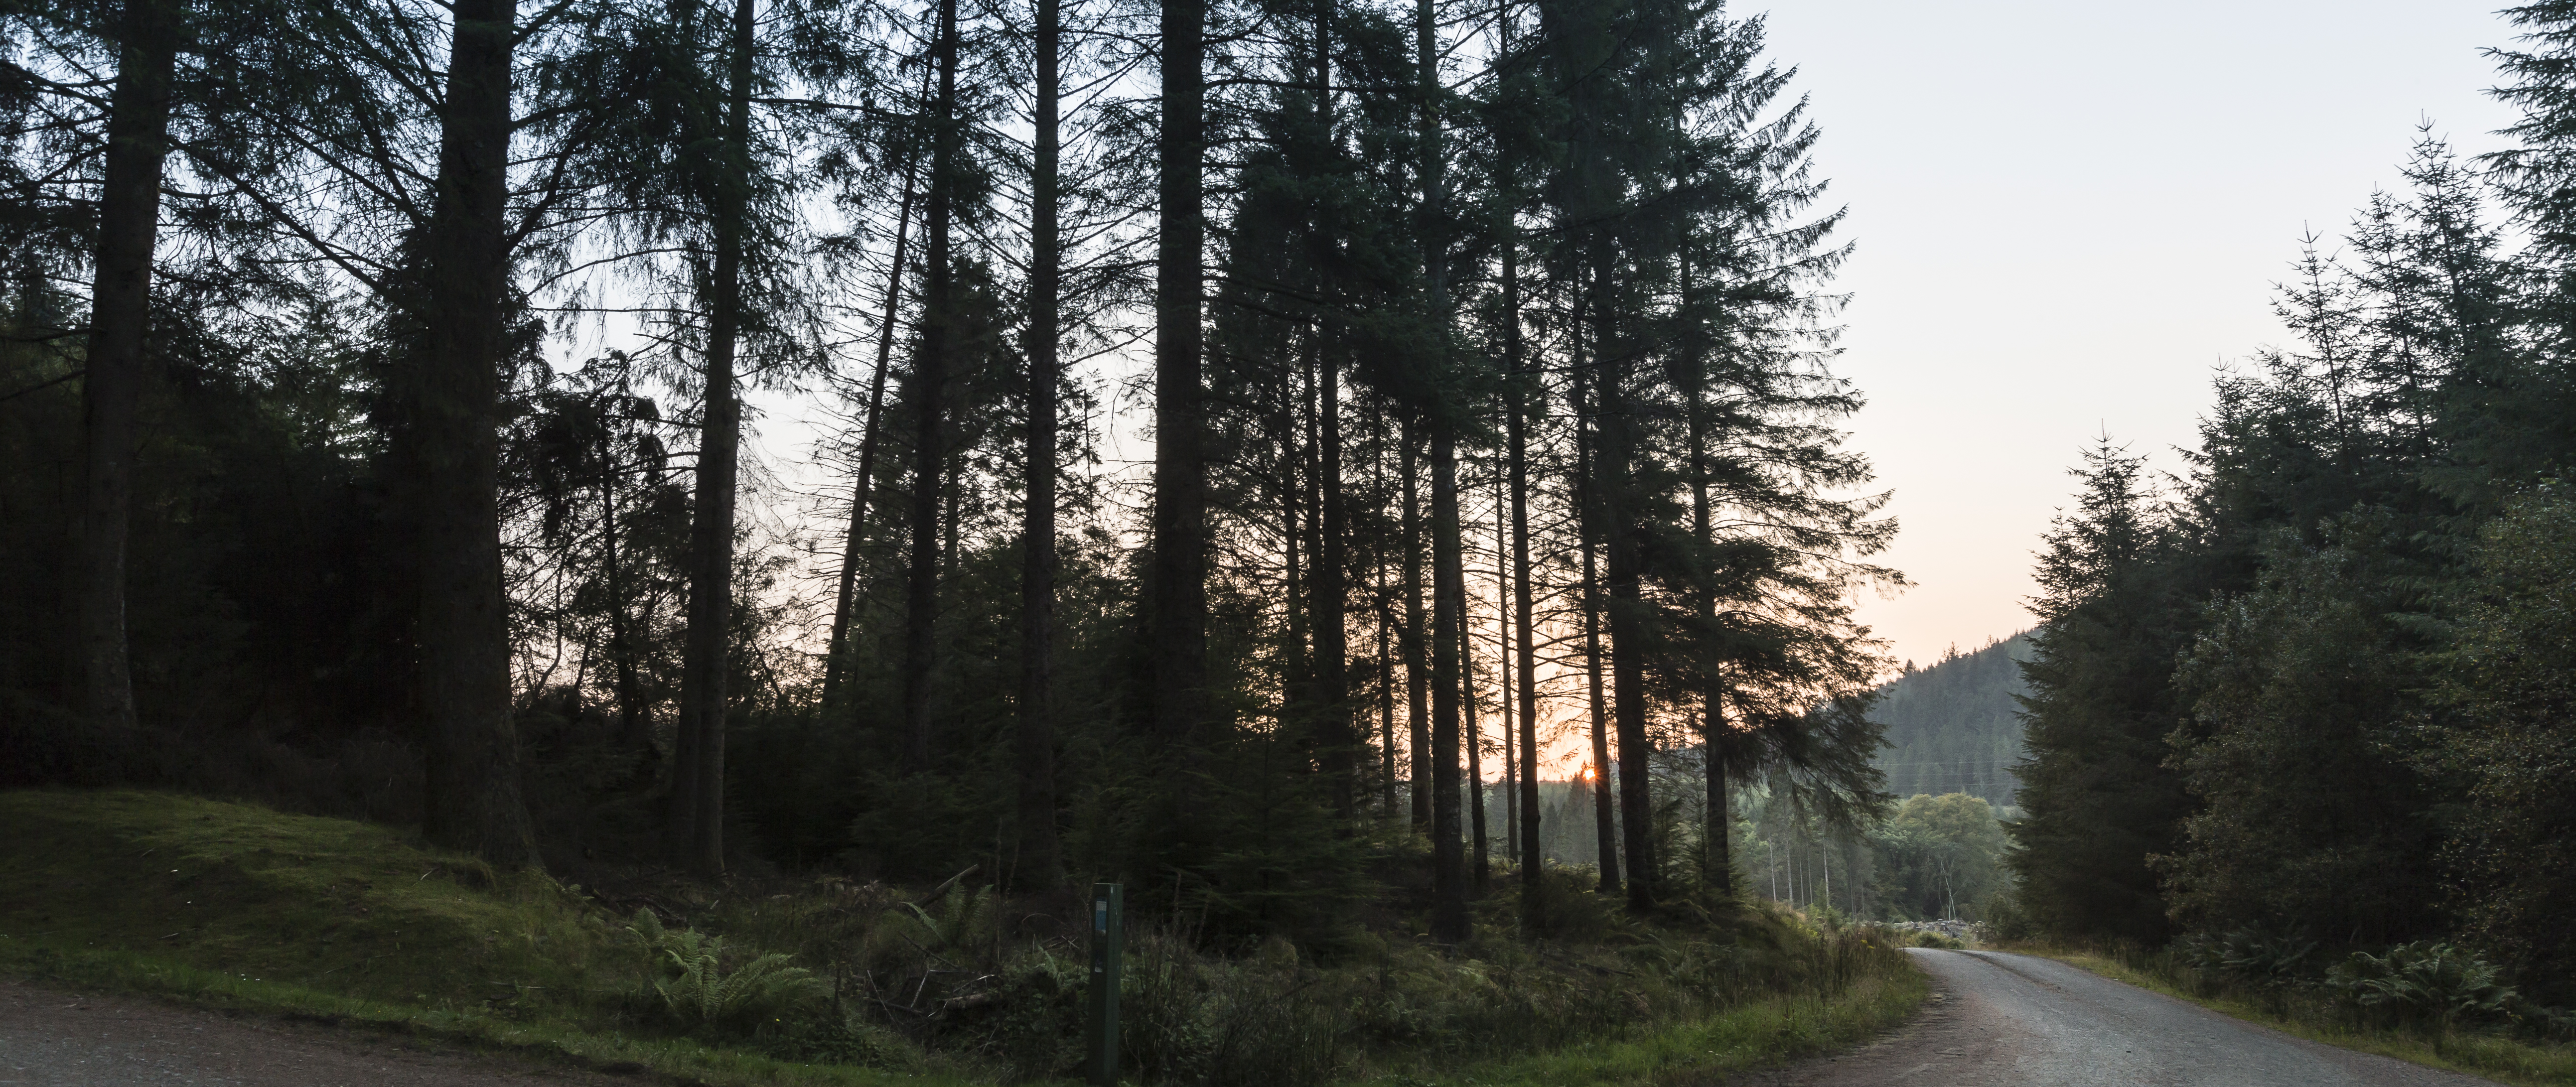 Ardcastle Forest at sunset